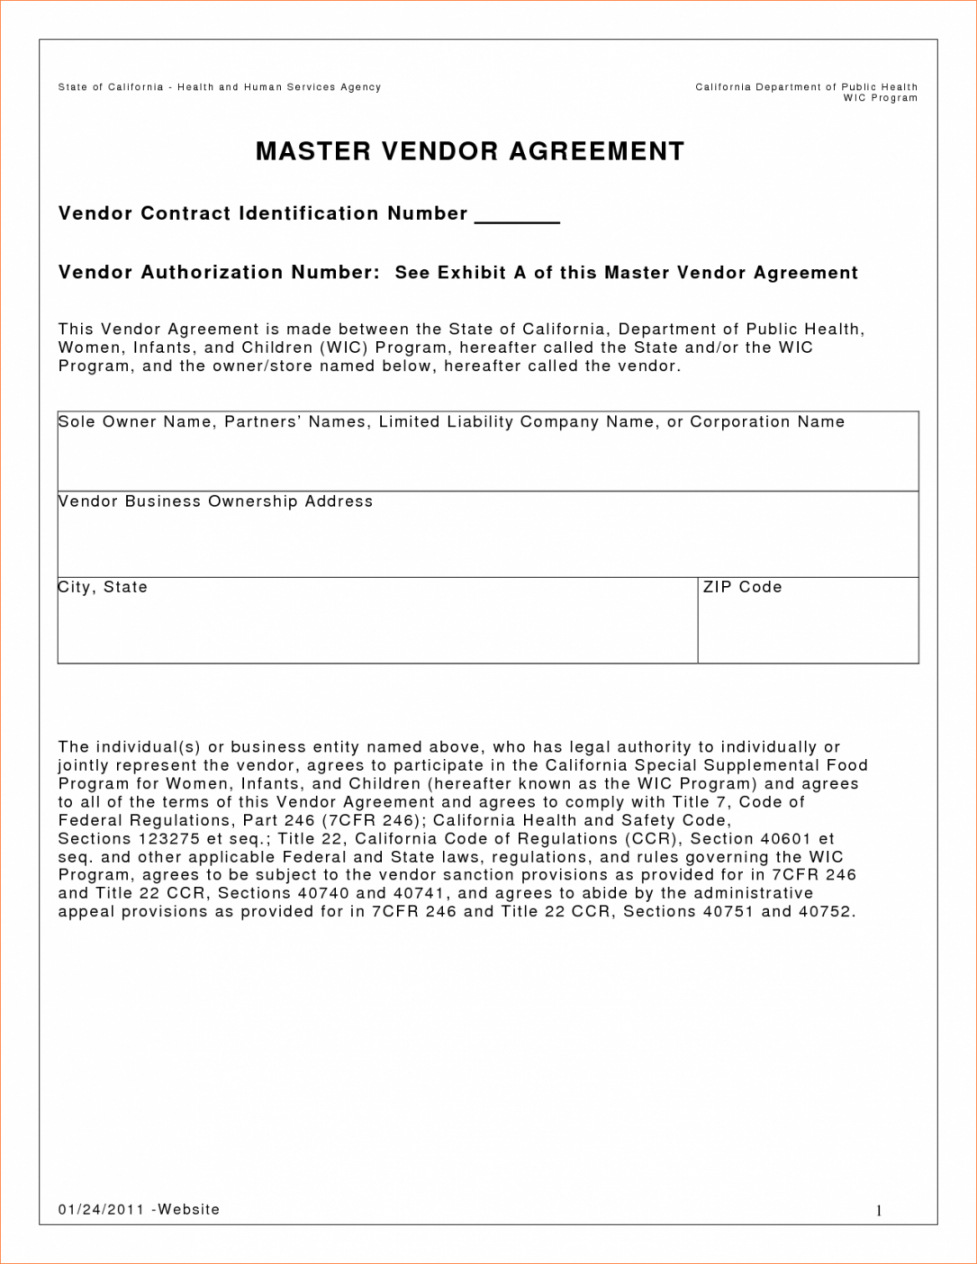 Preferred Supplier Agreement Sample throughout Preferred Supplier Agreement Template